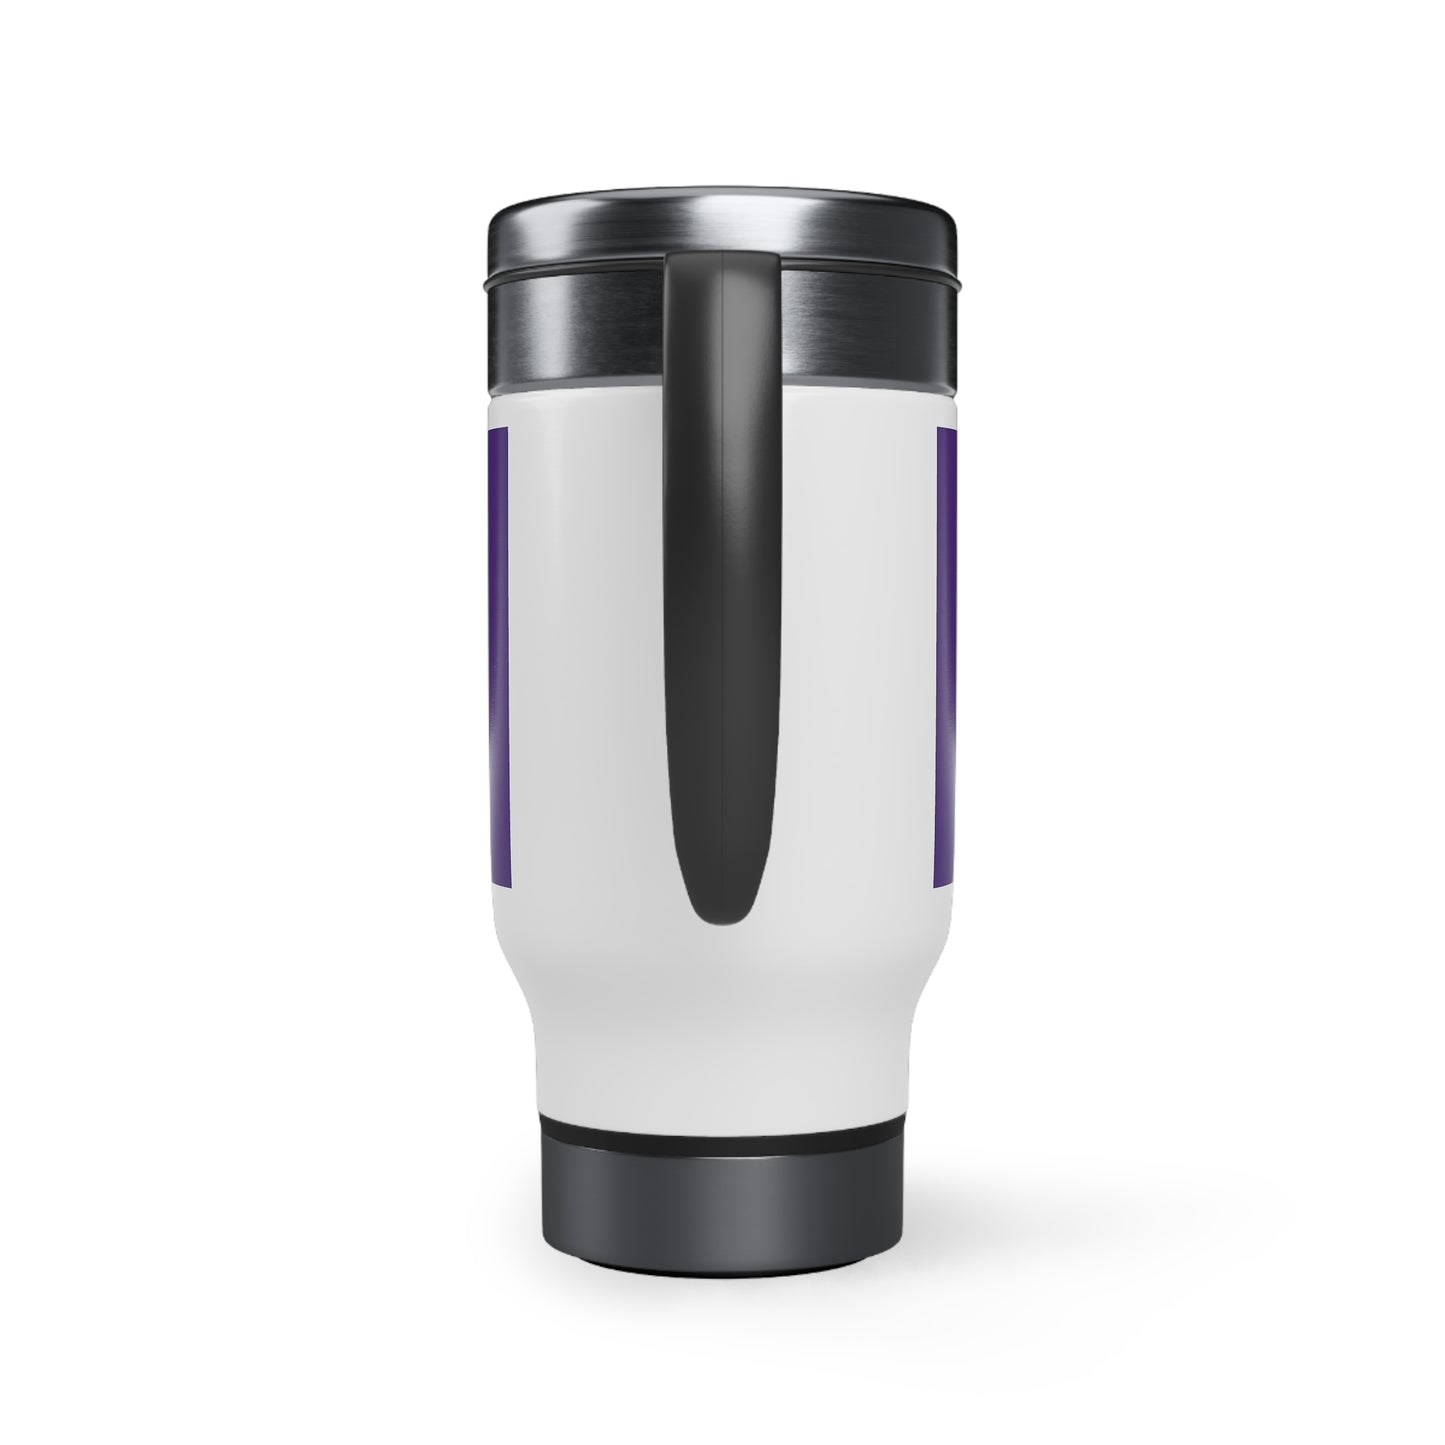 Copy of Stainless Steel Travel Mug with Handle, 14oz